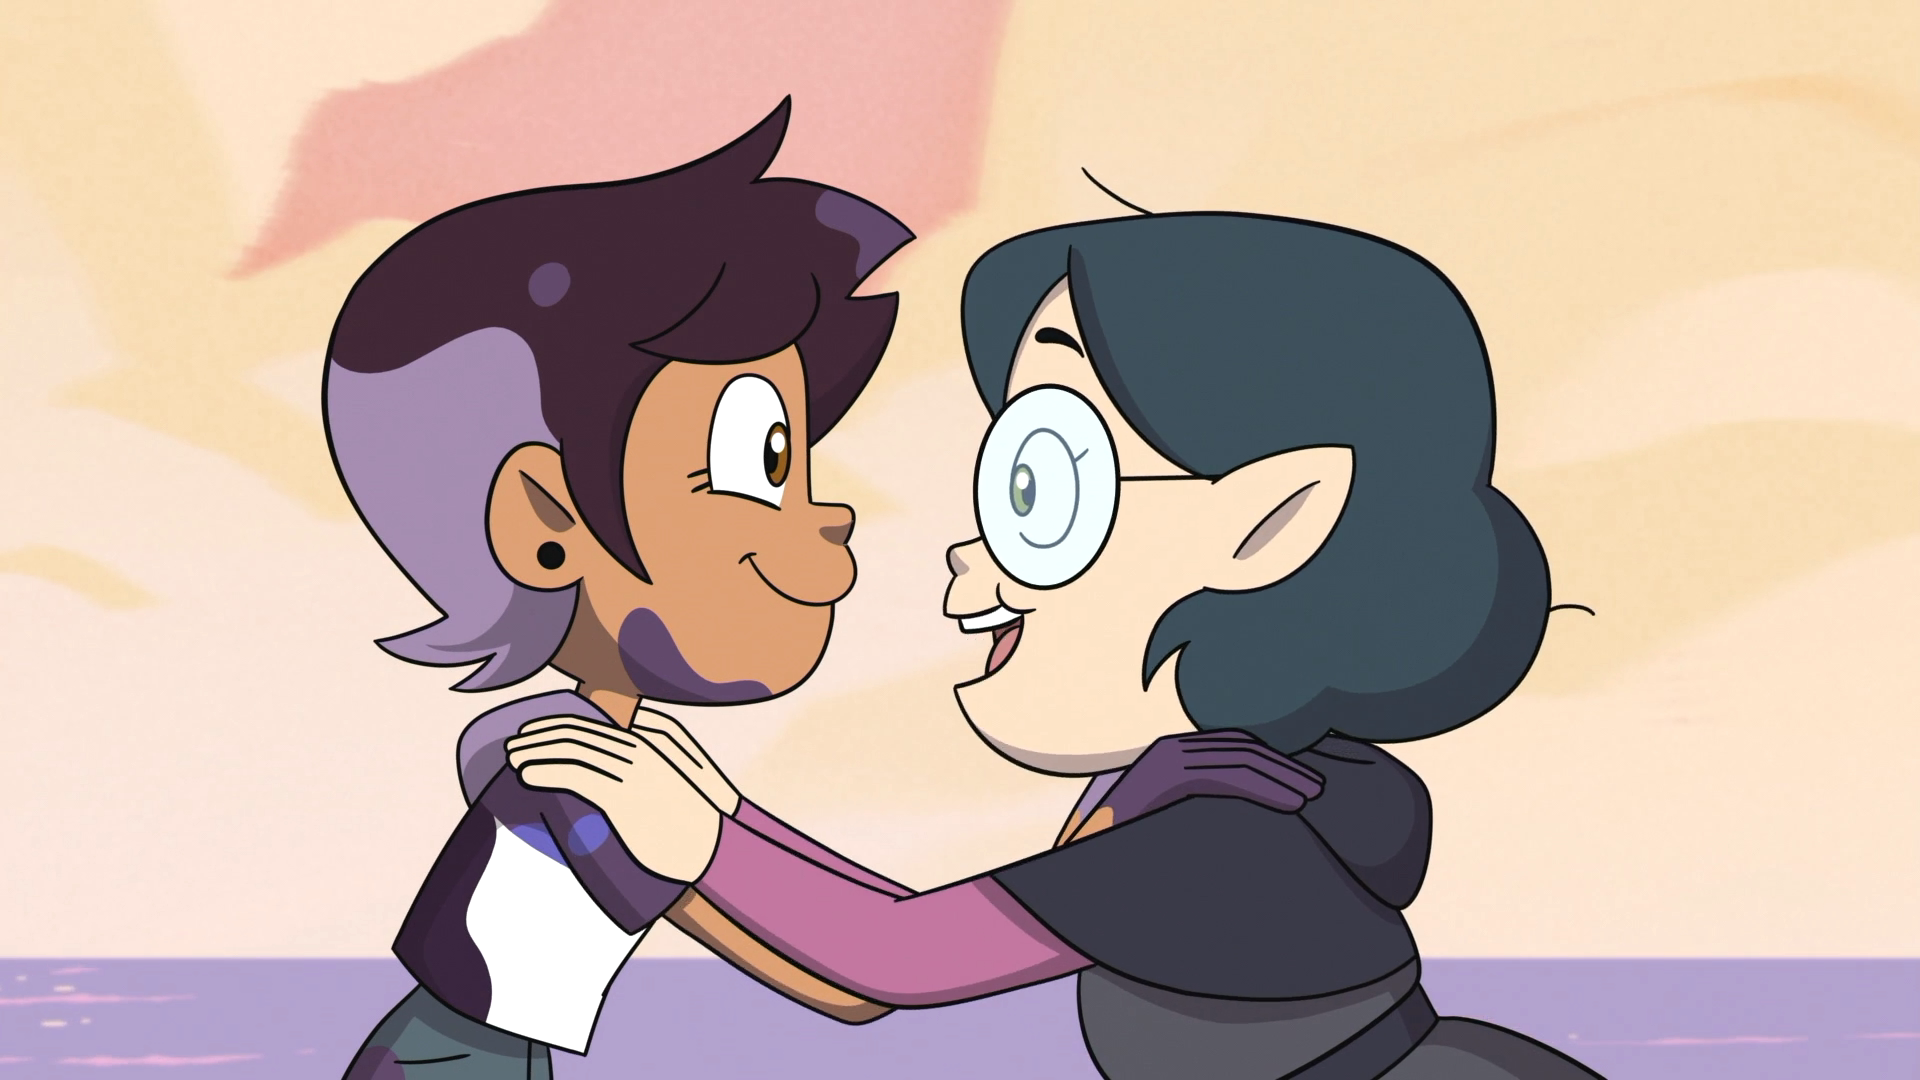 Willow becomes the ideal queer fantasy love story in episode 5 - Polygon